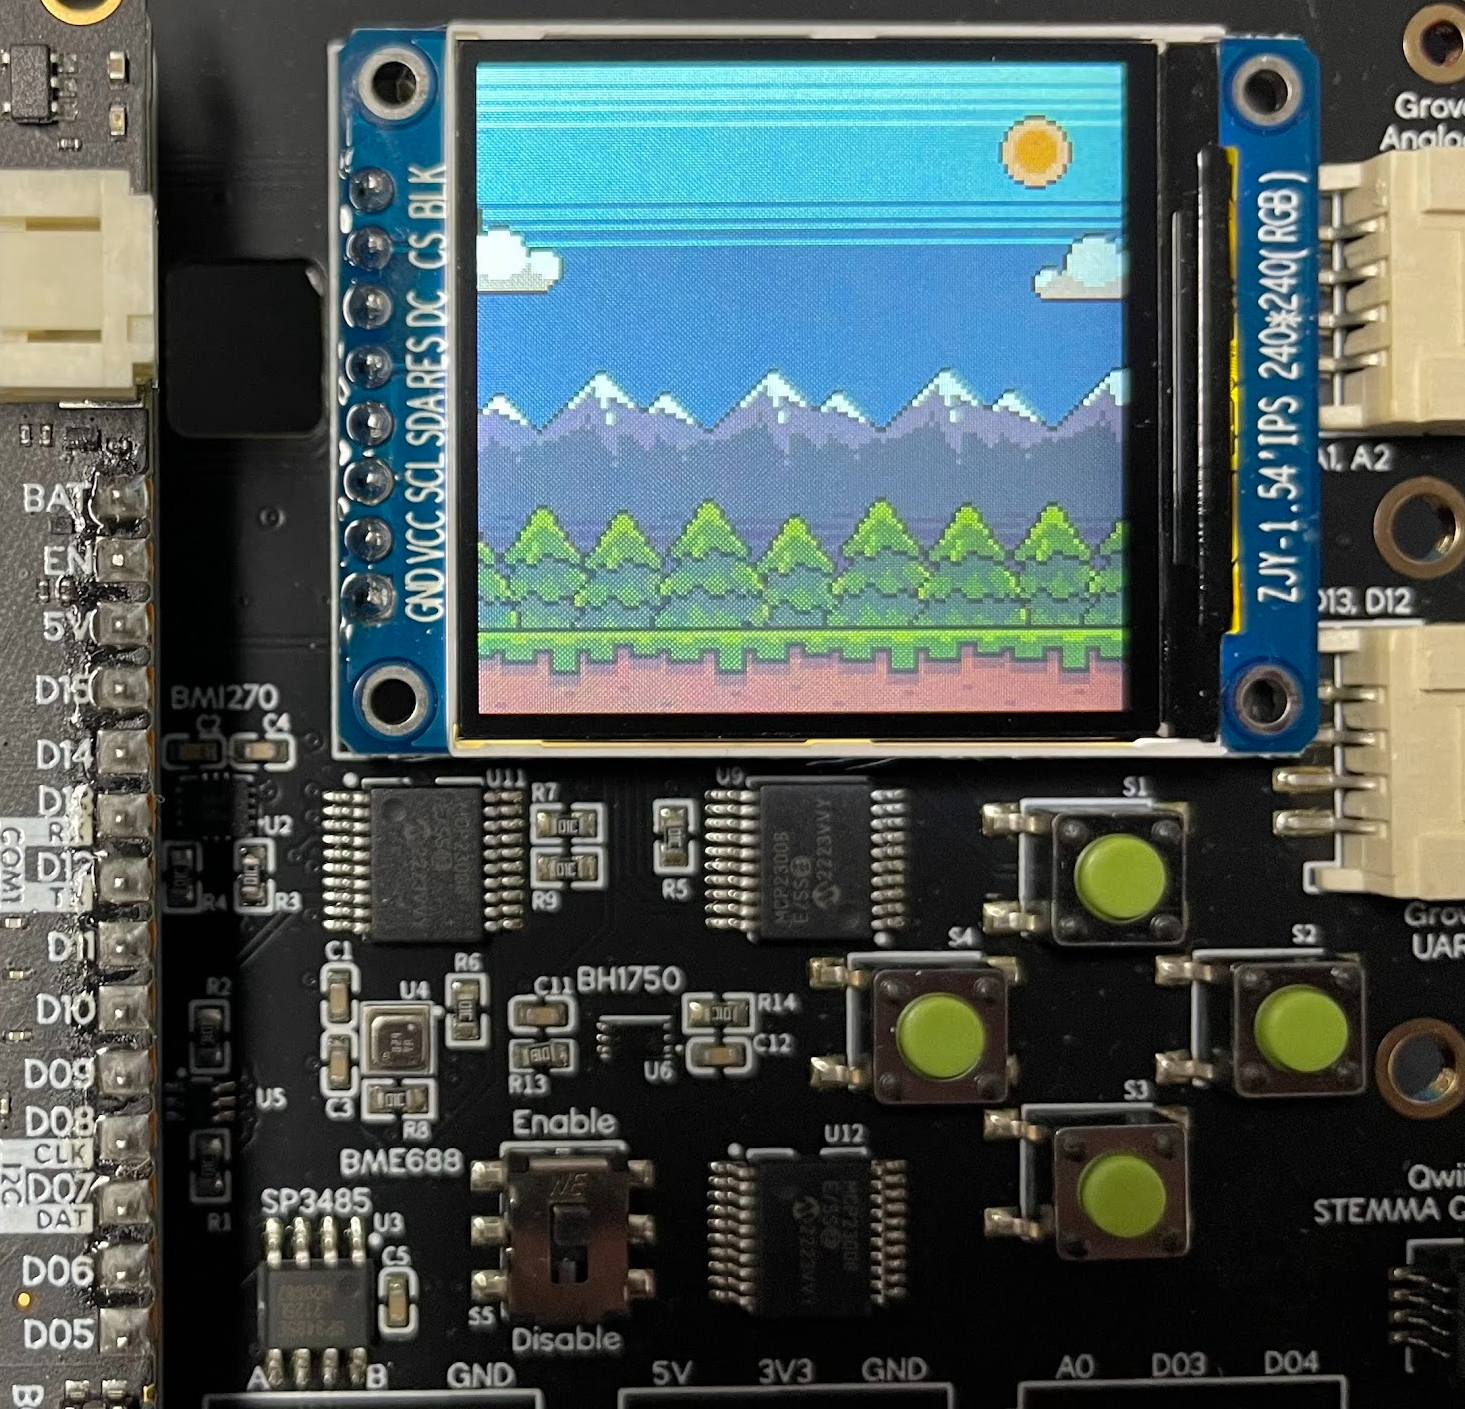 Glade2d demo running on a Project Lab board